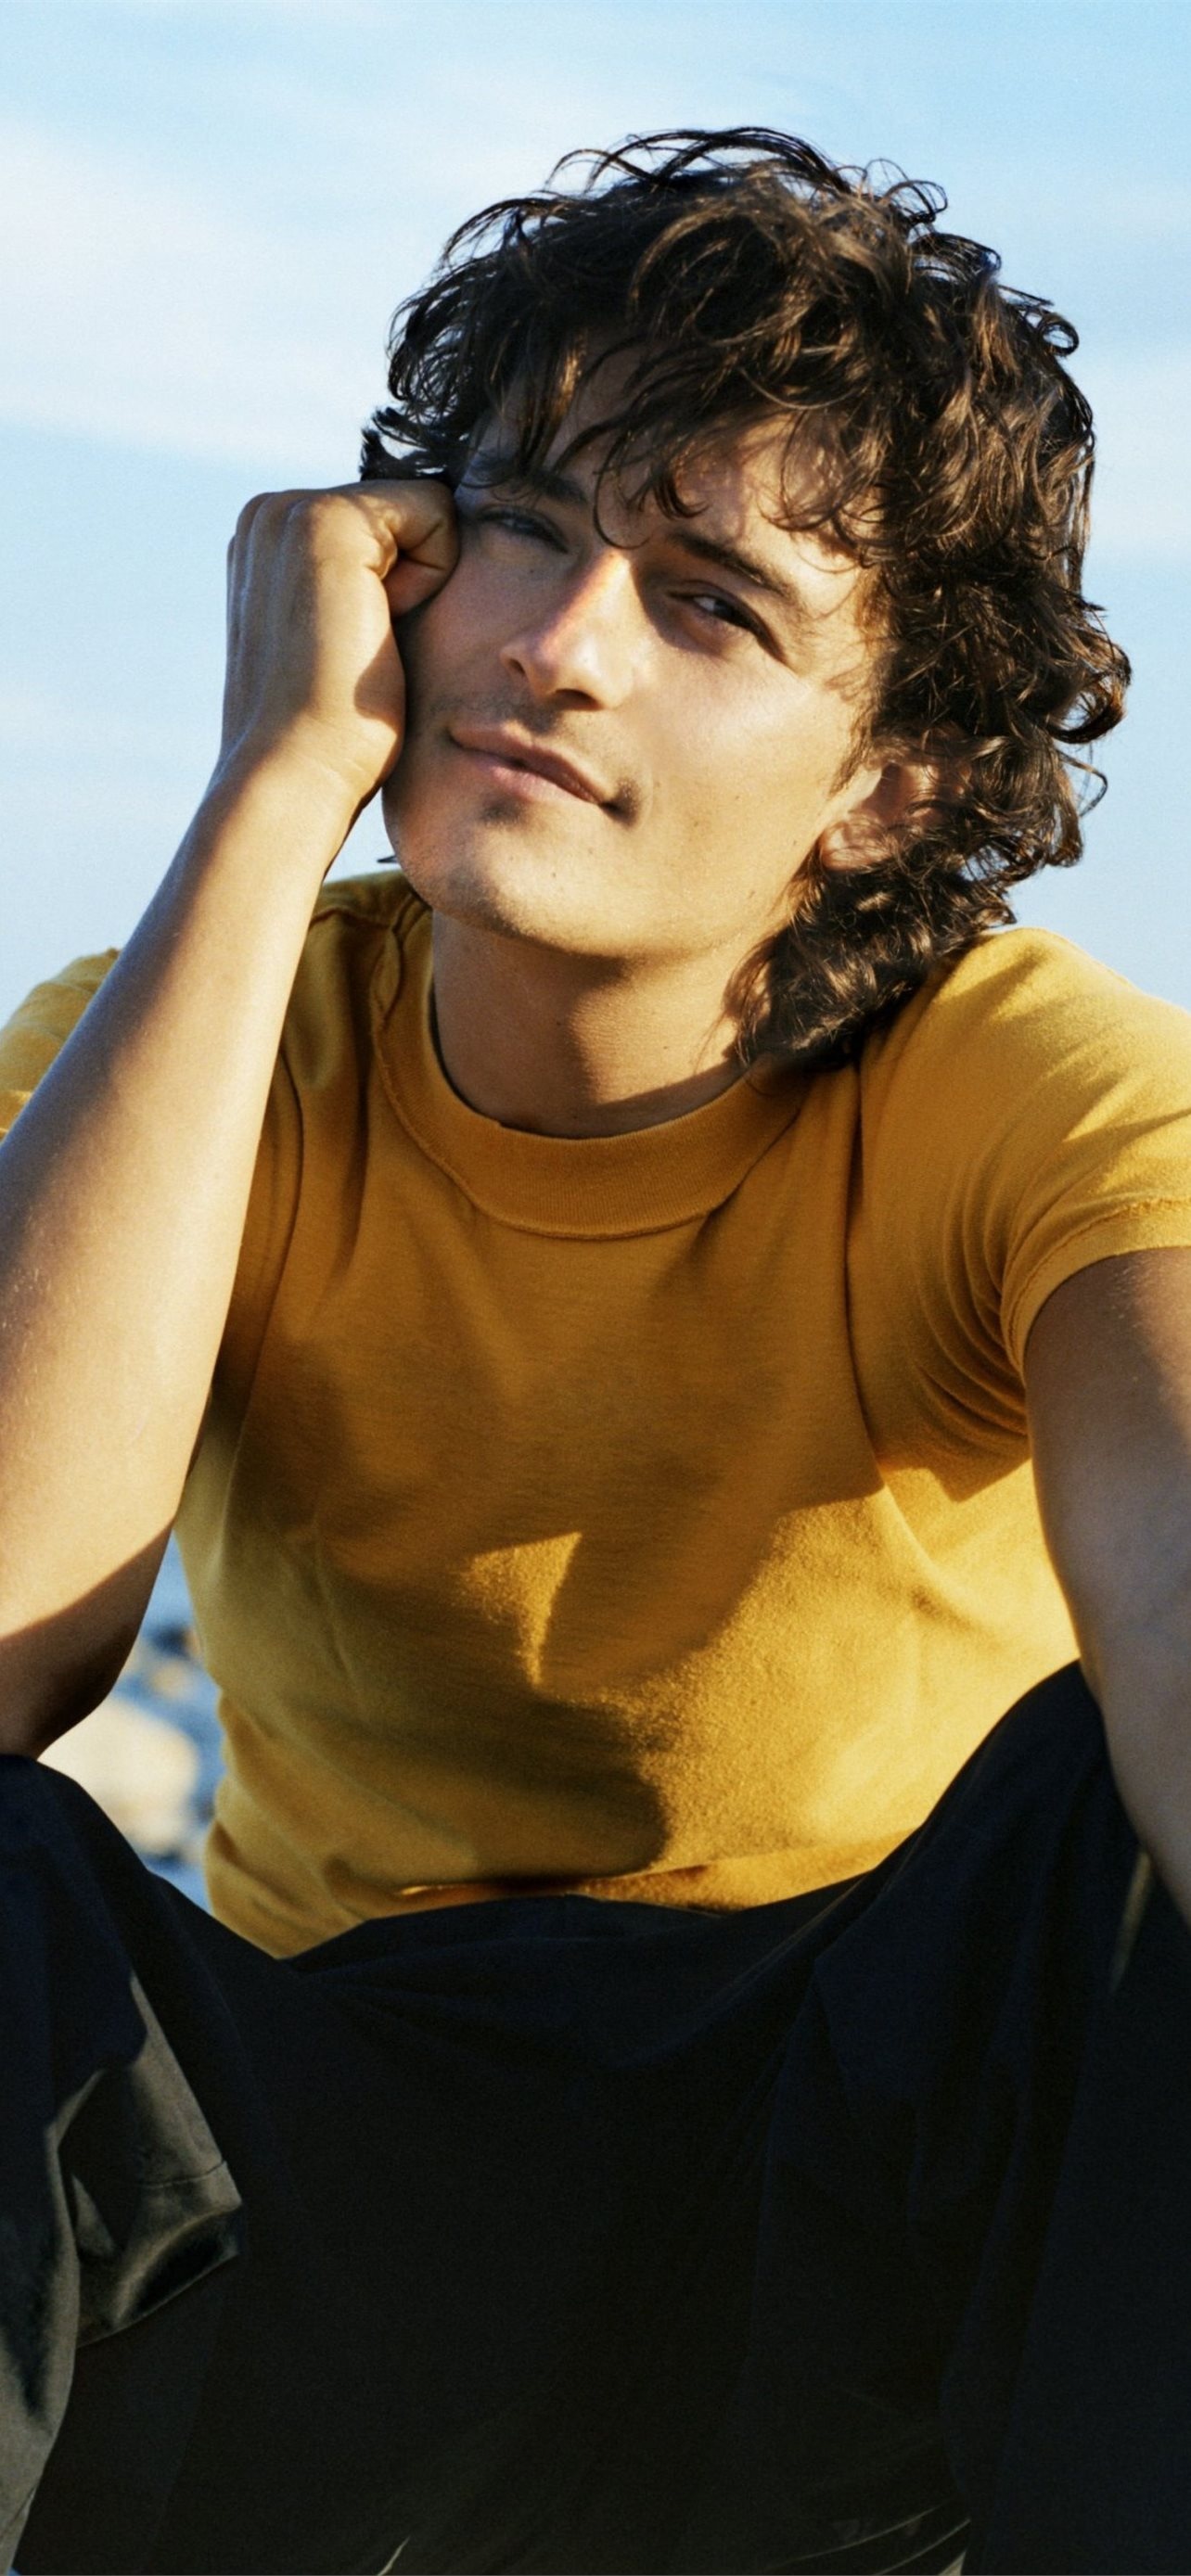 Orlando Bloom, iPhone wallpapers, Free download, High-quality images, 1290x2780 HD Phone